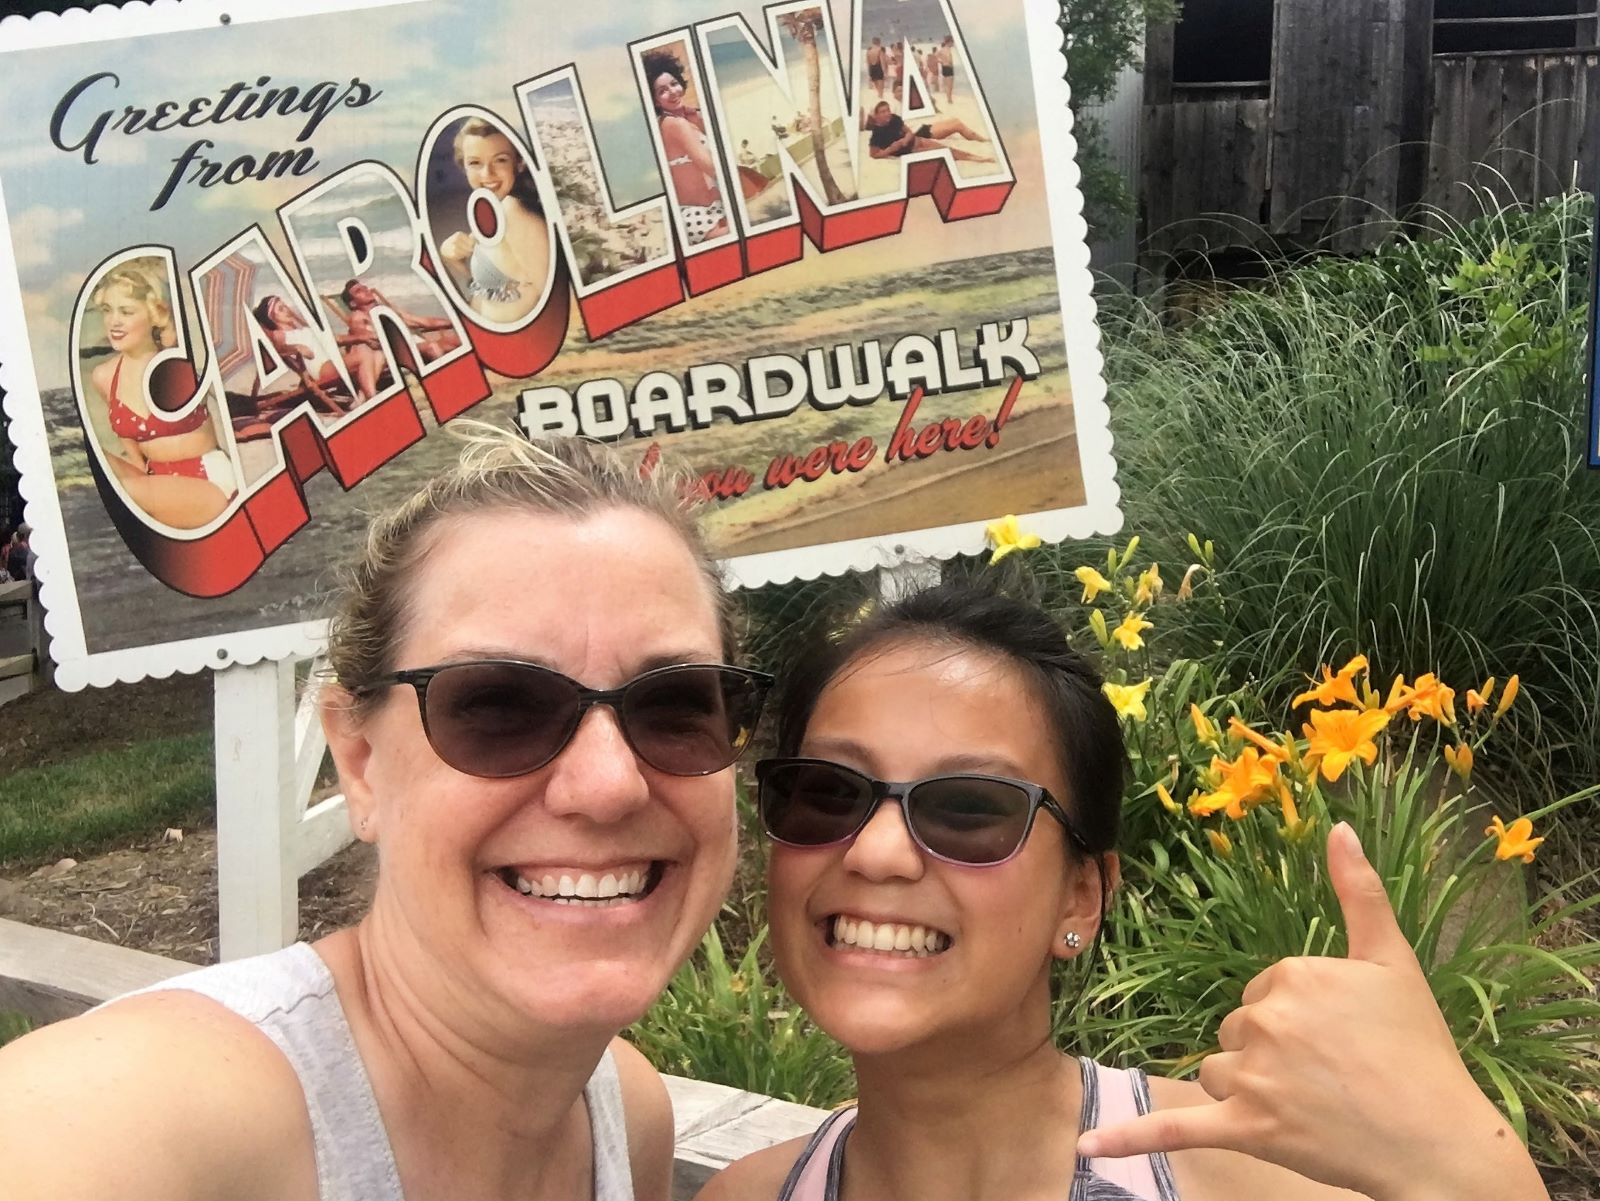 Grinning in front of the Carolina boardwalk sign at the amusement park in NC -- one of the thematic elements celebrating the Carolinas